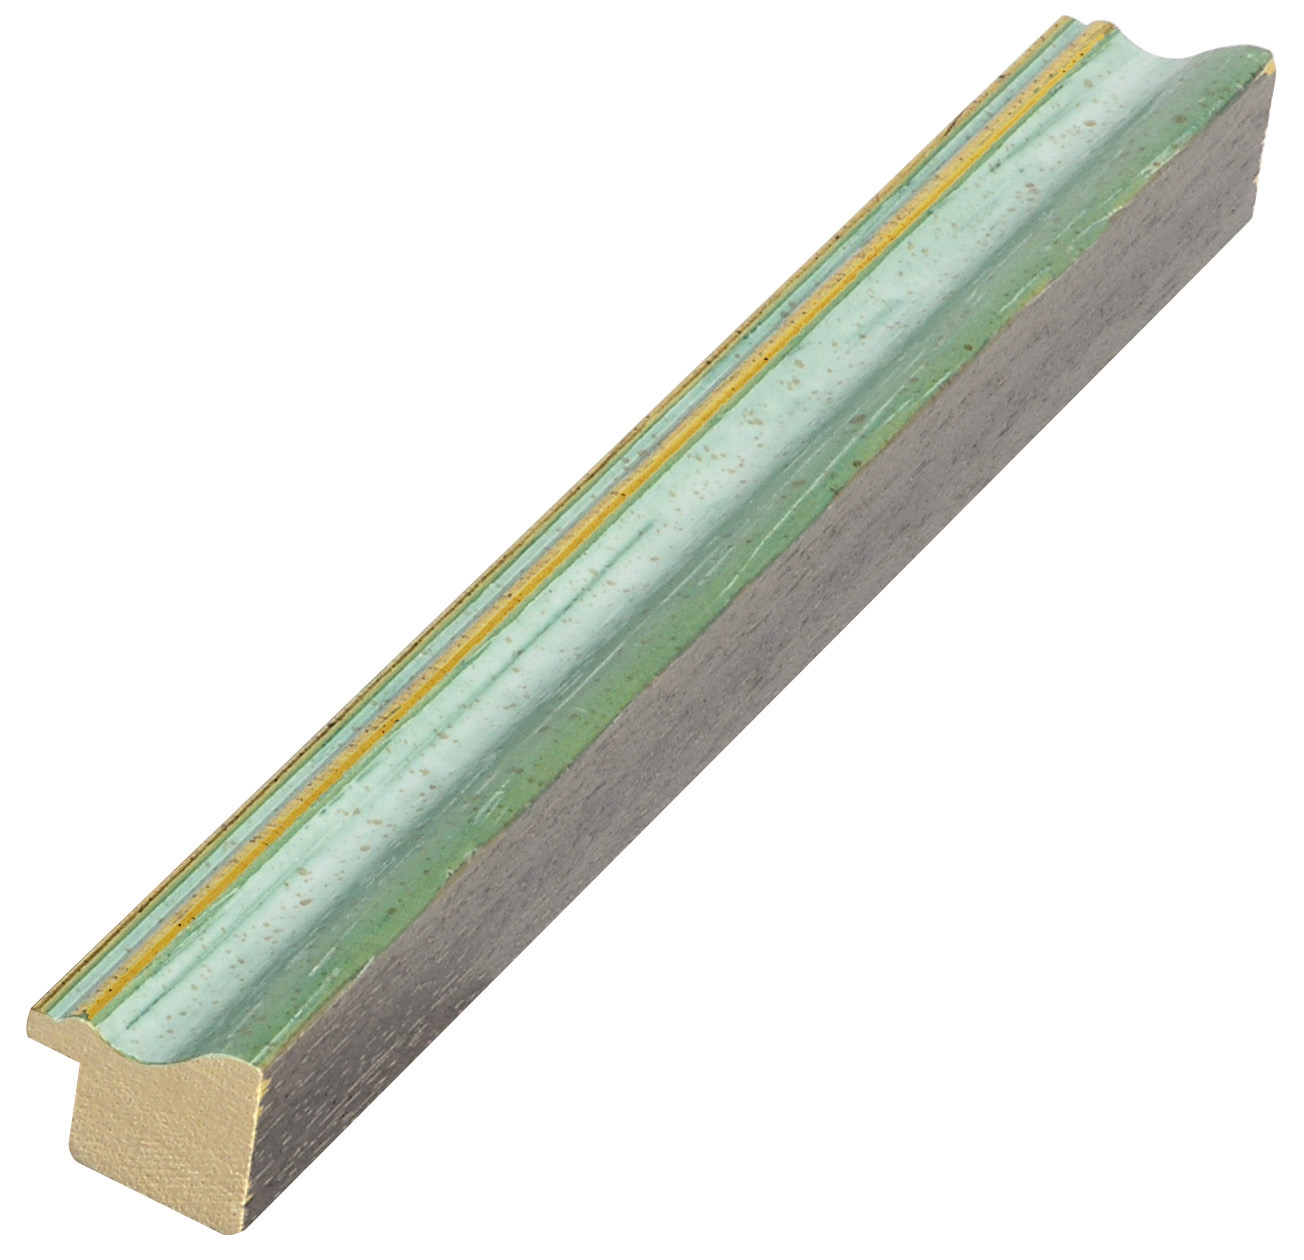 Moulding ayous jointed width 25mm - matt green with gold edge - 246VERDE